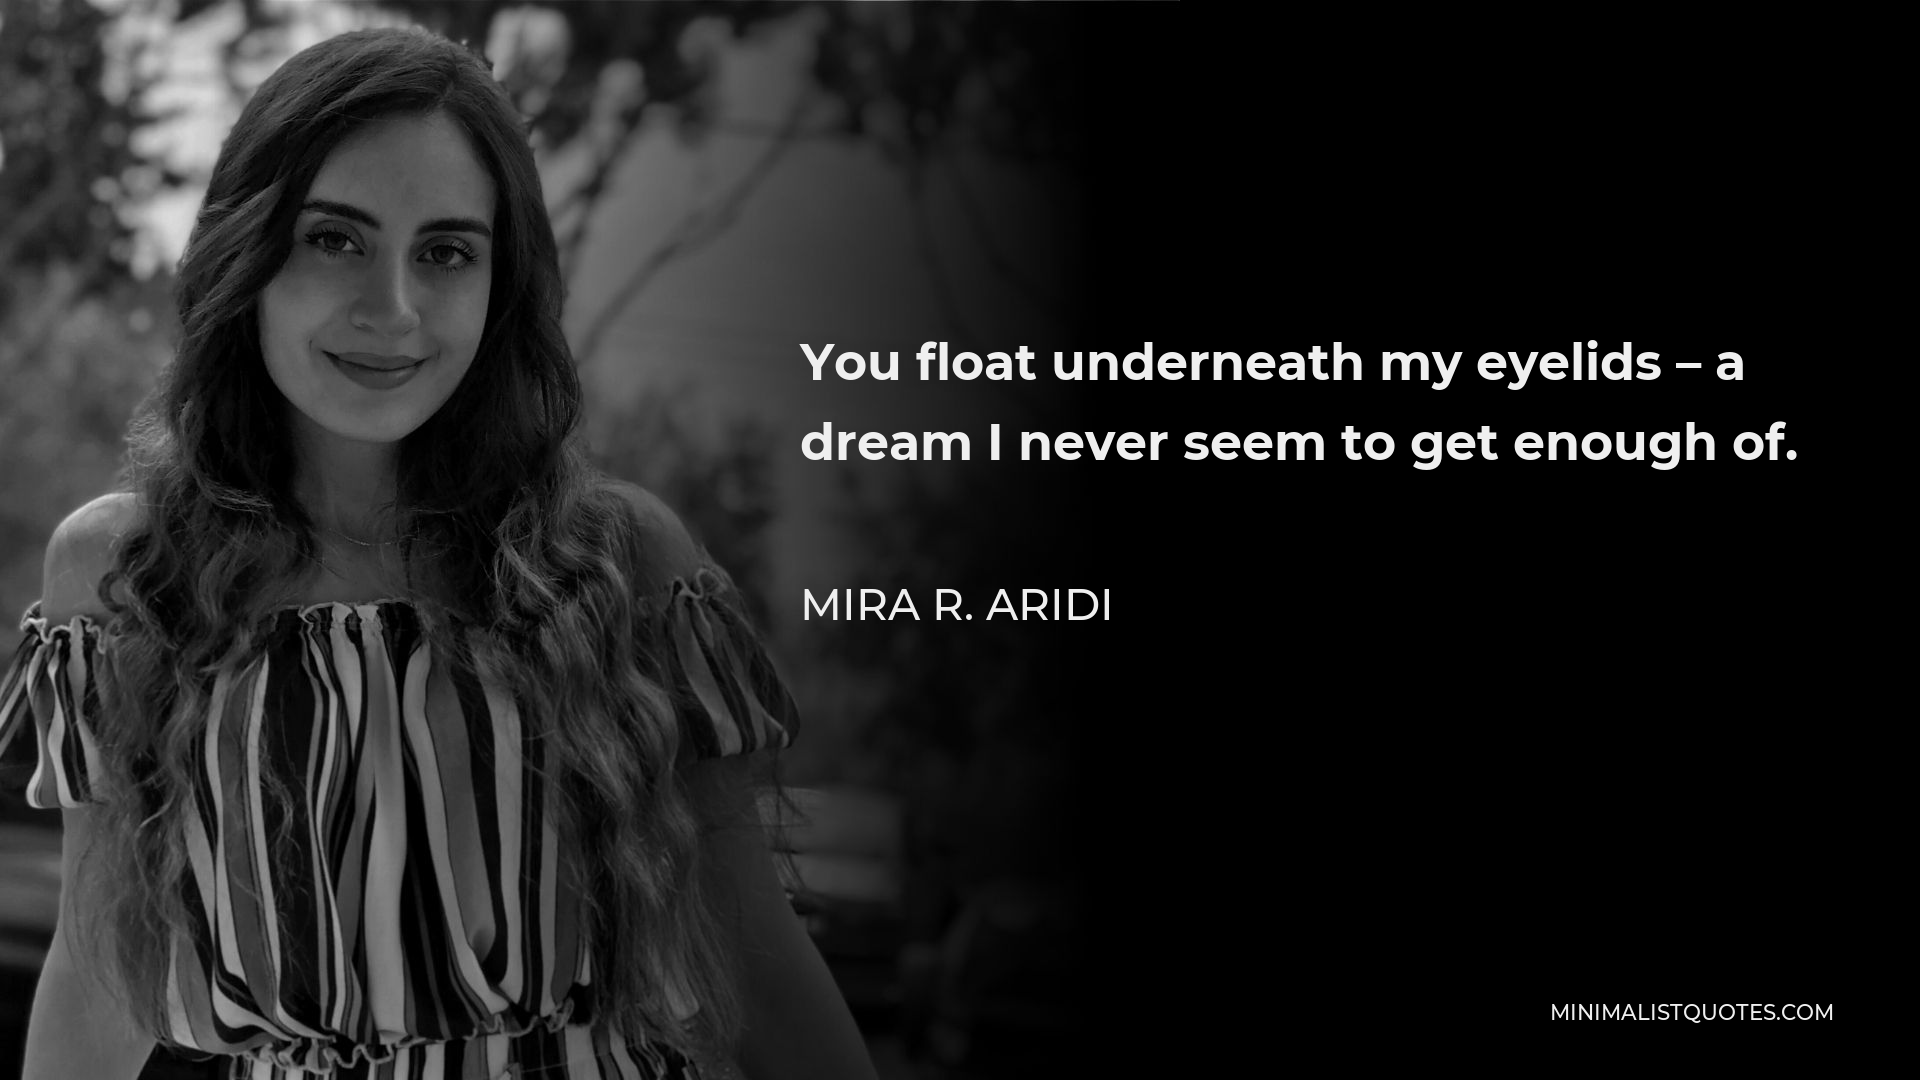 Mira R. Aridi Quote - You float underneath my eyelids – a dream I never seem to get enough of.